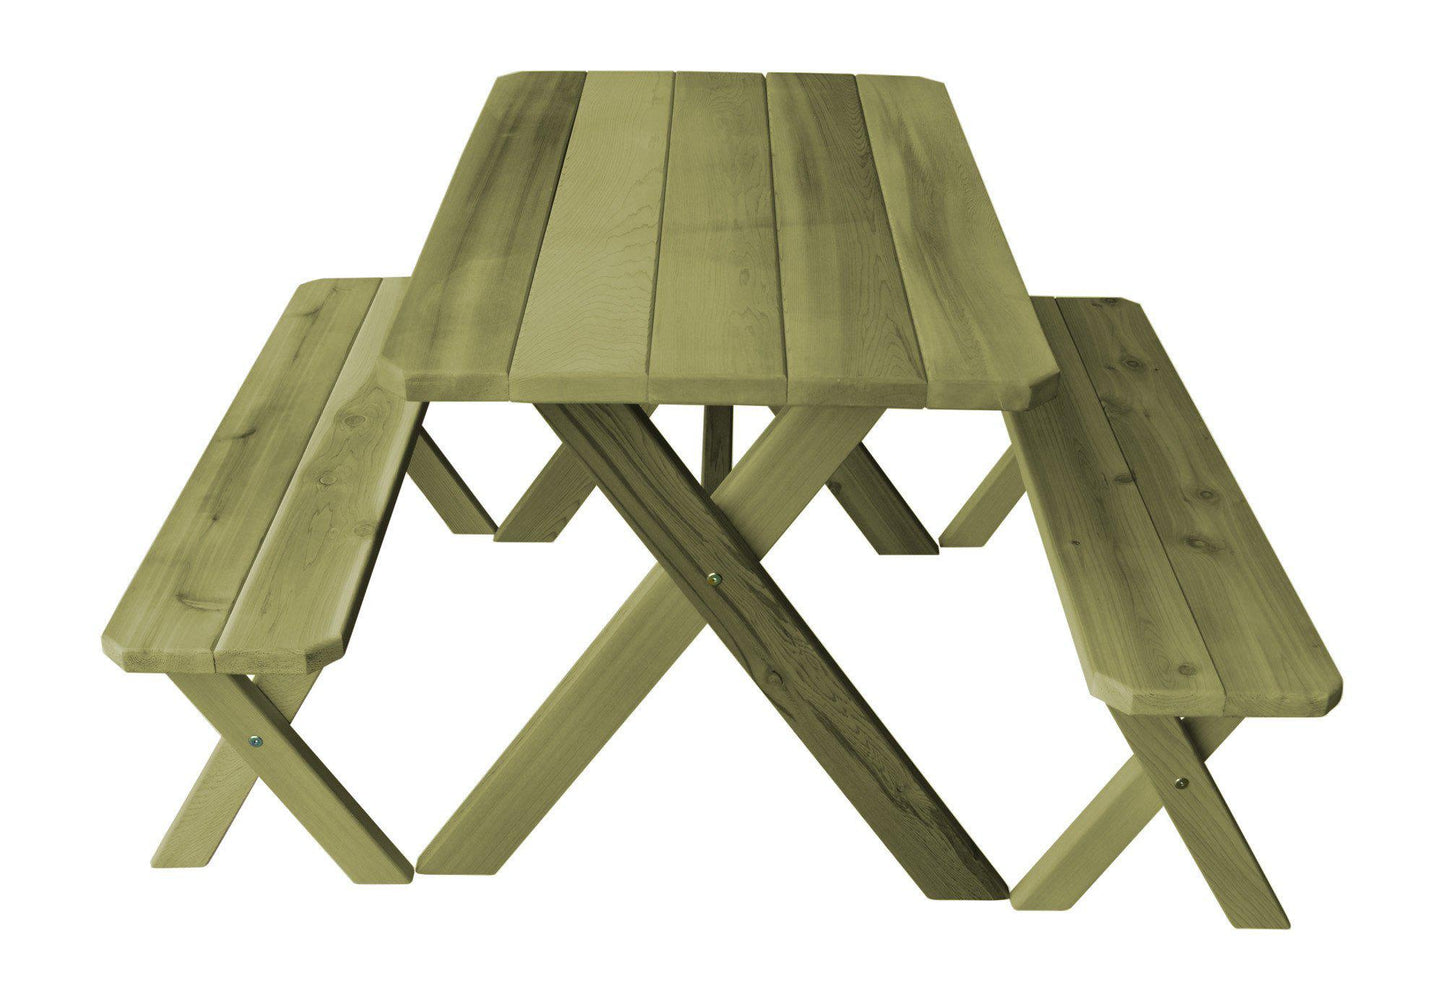 A&L FURNITURE CO. Western Red Cedar 4' Cross-leg Table w/2 Benches - Specify for FREE 2" Umbrella Hole - LEAD TIME TO SHIP 2 WEEKS